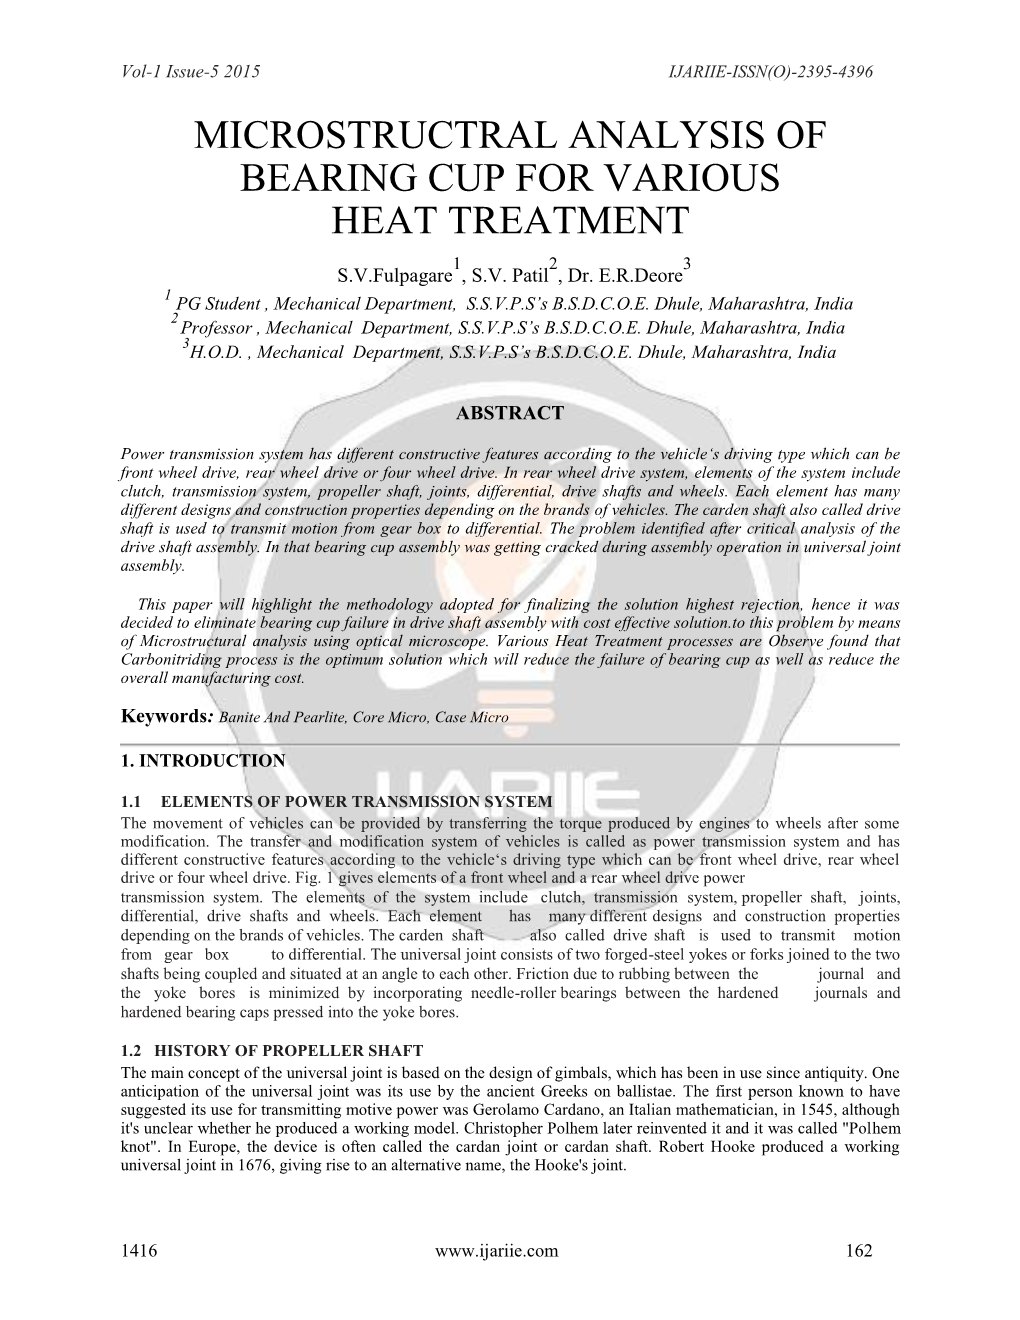 Microstructral Analysis of Bearing Cup for Various Heat Treatment